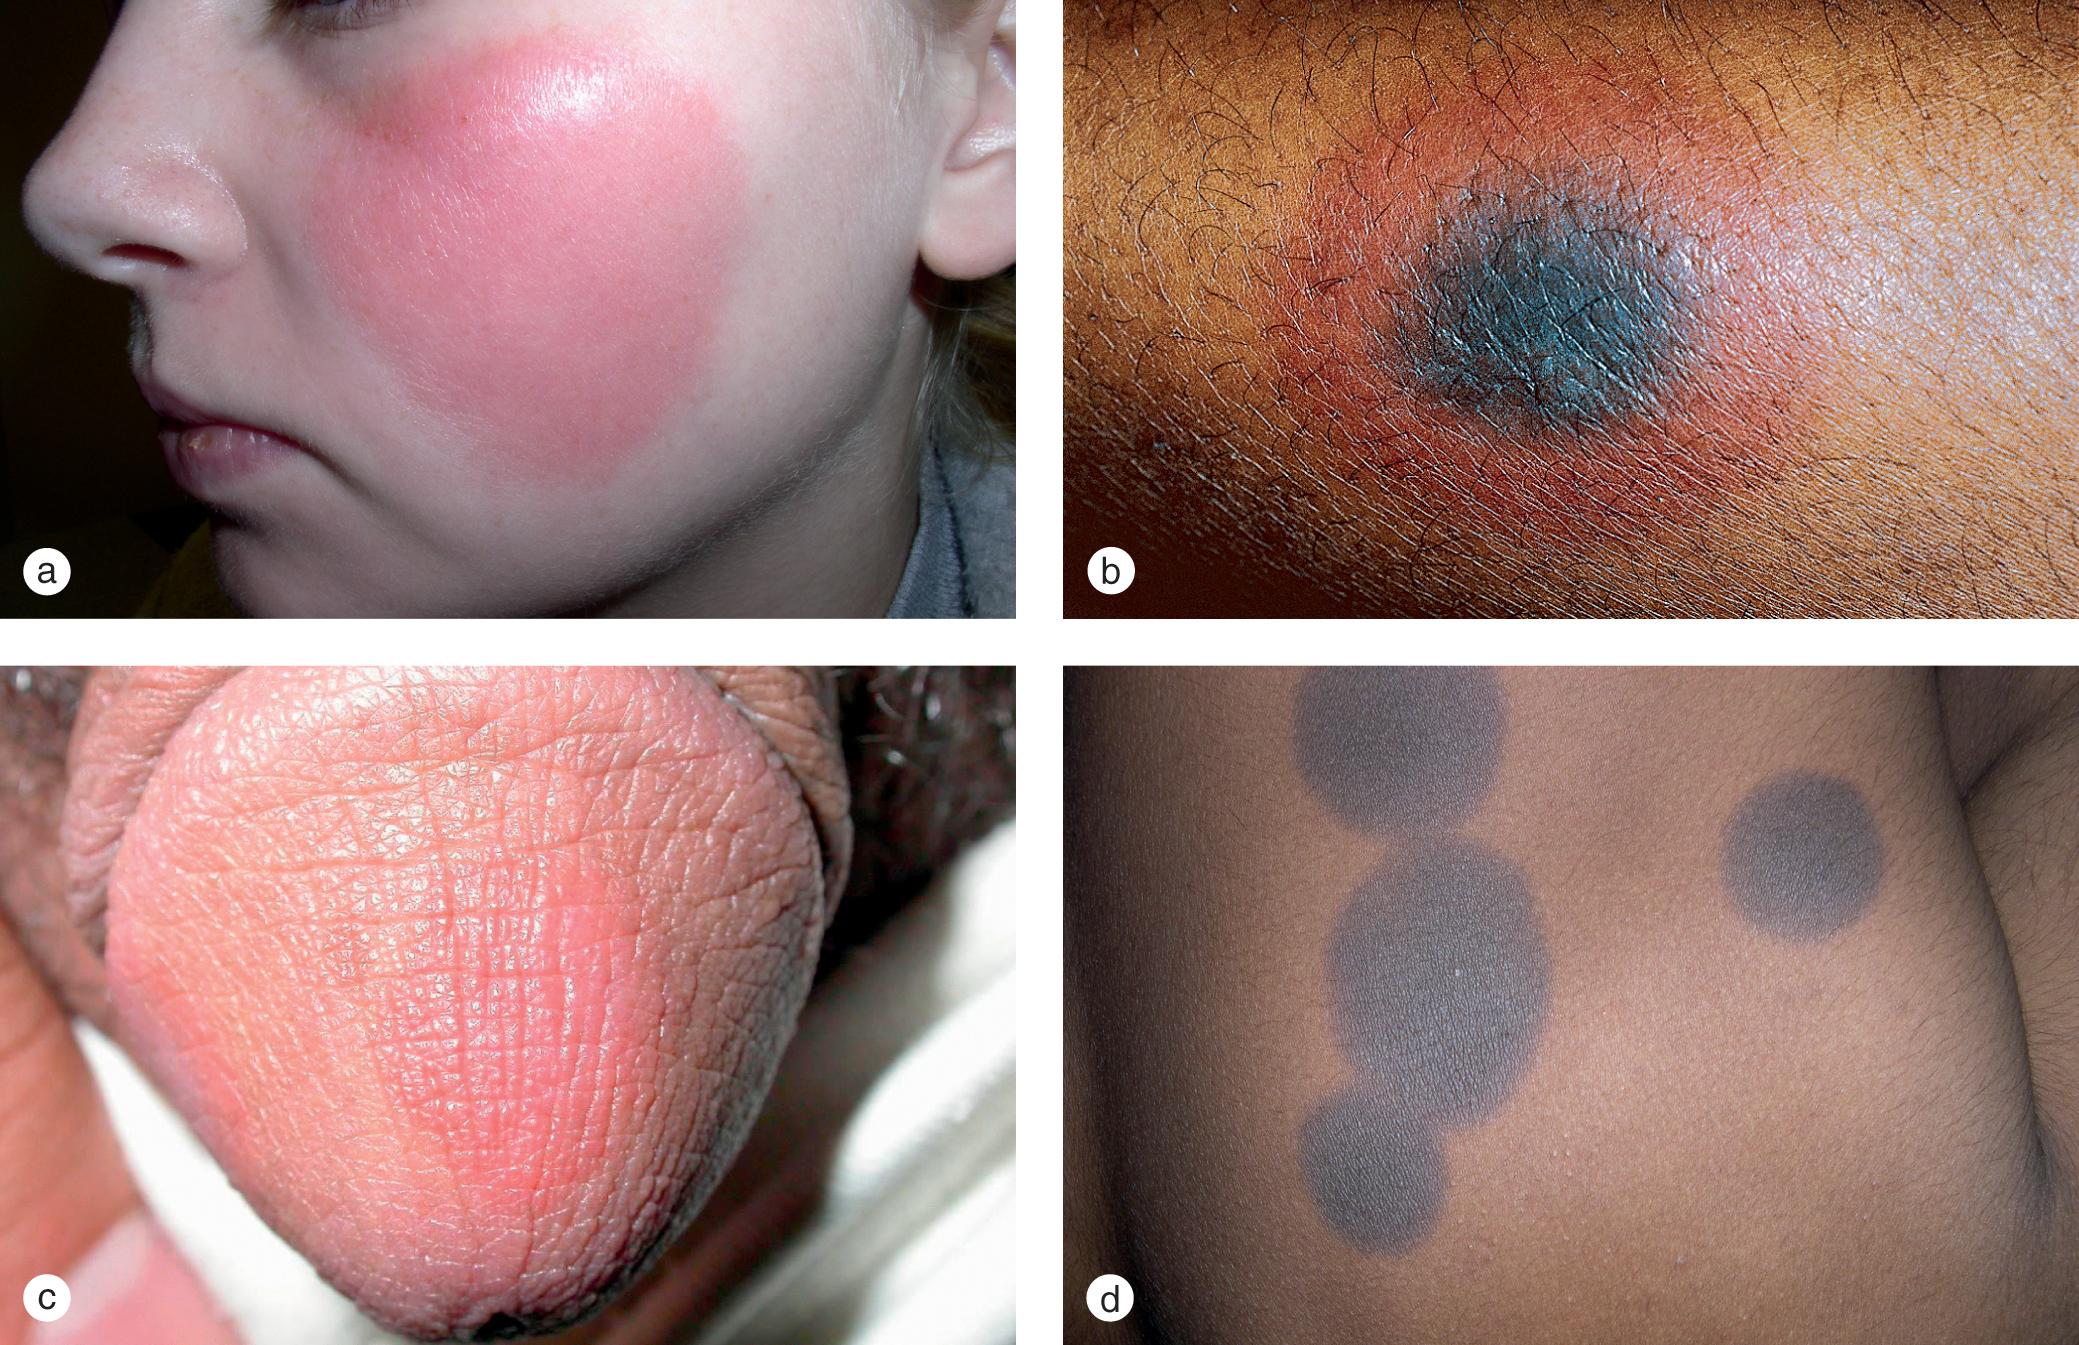 Fig. 7.4, Fixed drug eruption. (a) This adolescent girl developed a recurrent fixed drug reaction whenever she took a non-steroidal anti-inflammatory drug for menstrual cramps. (b) This 10-year-old, darkly pigmented boy developed a recurrent target lesion in the same spot on his arm after exposure to a cold remedy. Note the dusky center with marked hyperpigmentation. (c) Typical itchy violaceous plaques developed on the glans penis of this adolescent boy when he was started on doxycycline for treatment of acne. (d) Dramatic hyperpigmented macules persisted after a fixed drug eruption to an oral antibiotic resolved.